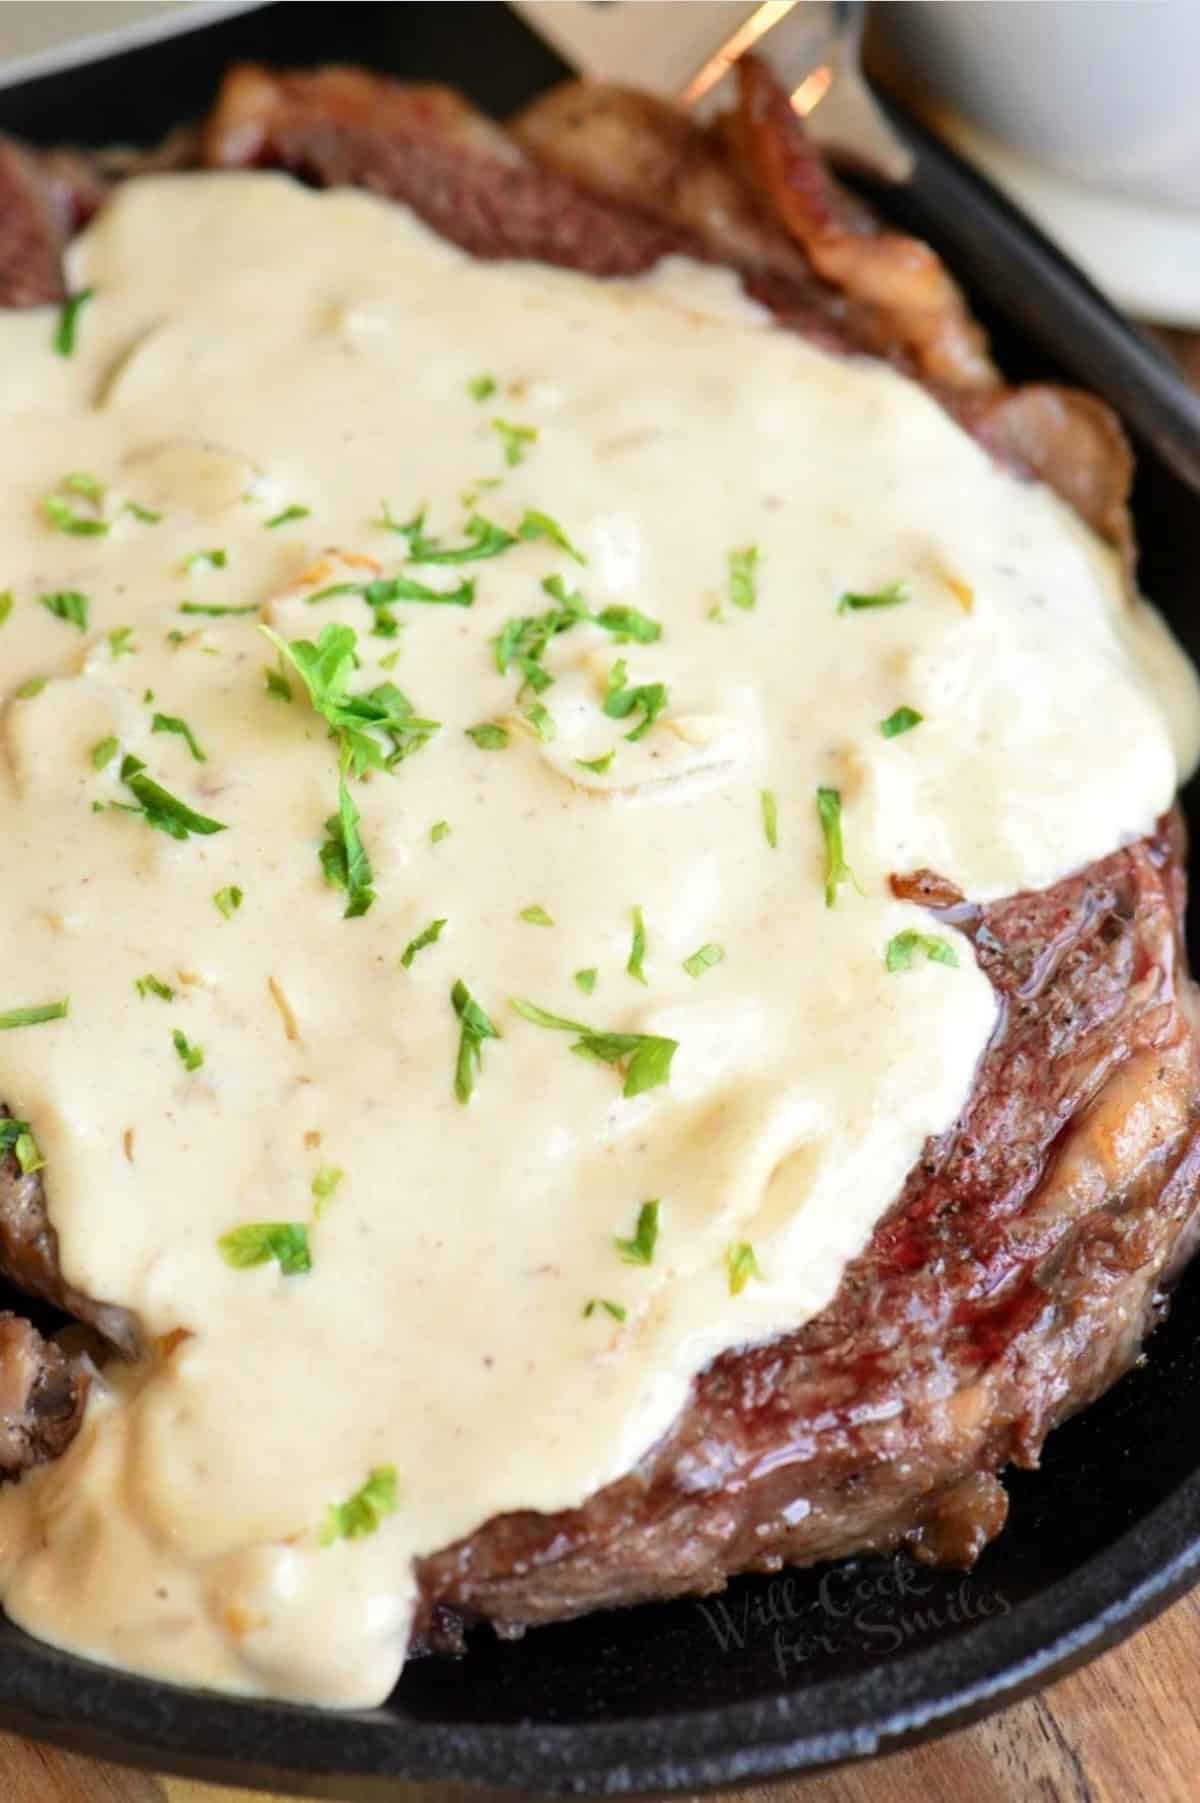 ribeye steak on a cast iron plate with creamy sauce over it.